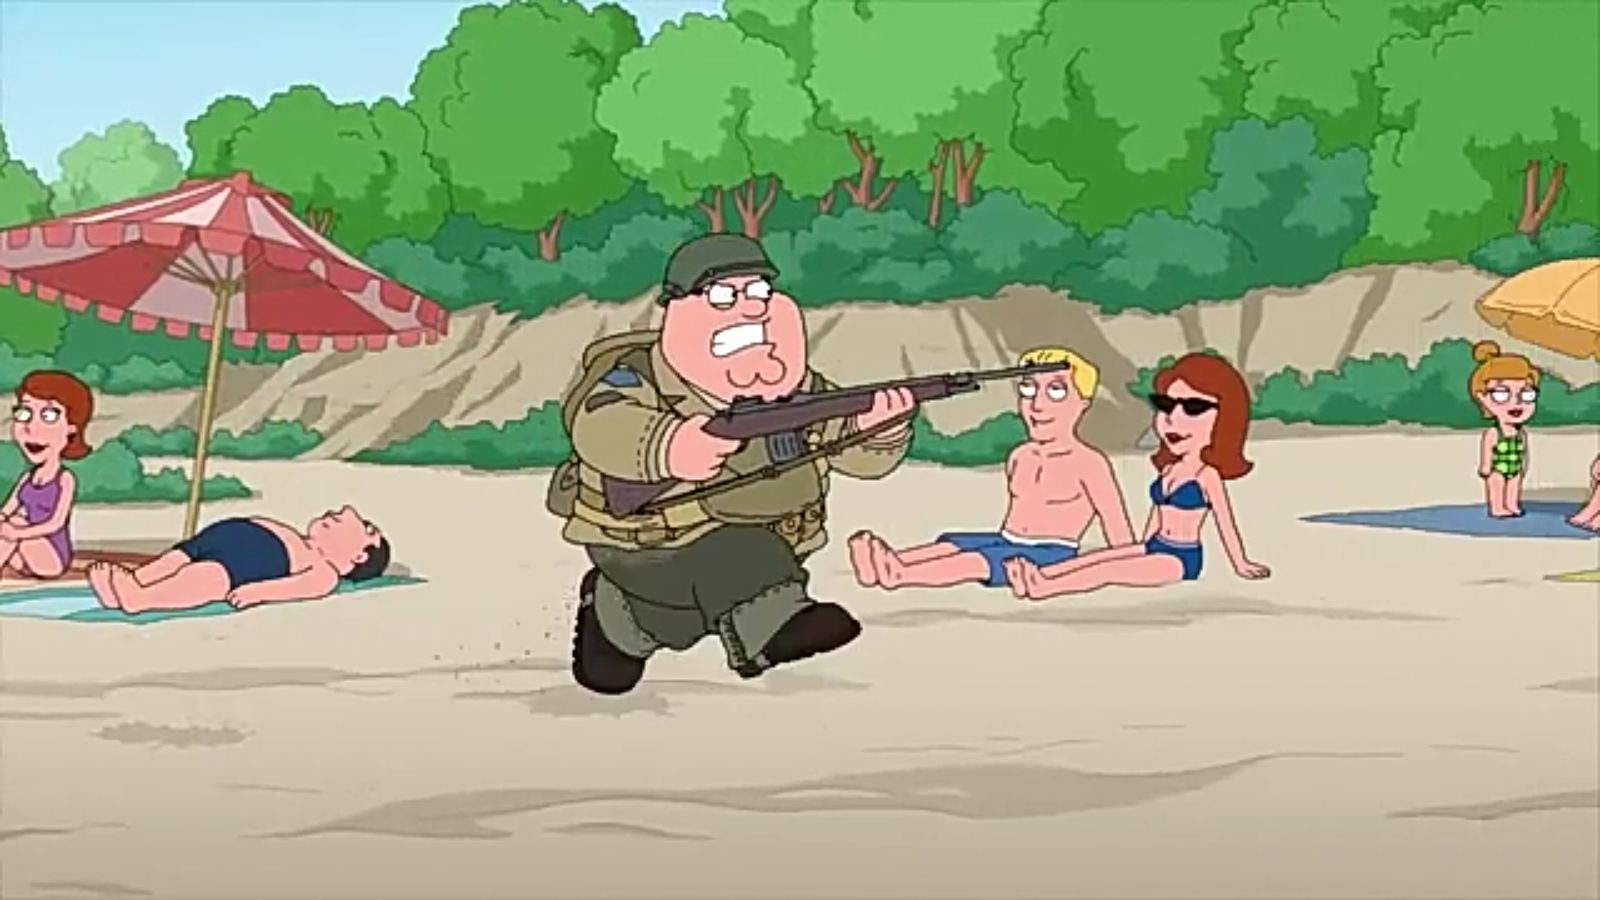 It's like when I stormed the coast of Normandy. - Family guy, Normandy, Serials